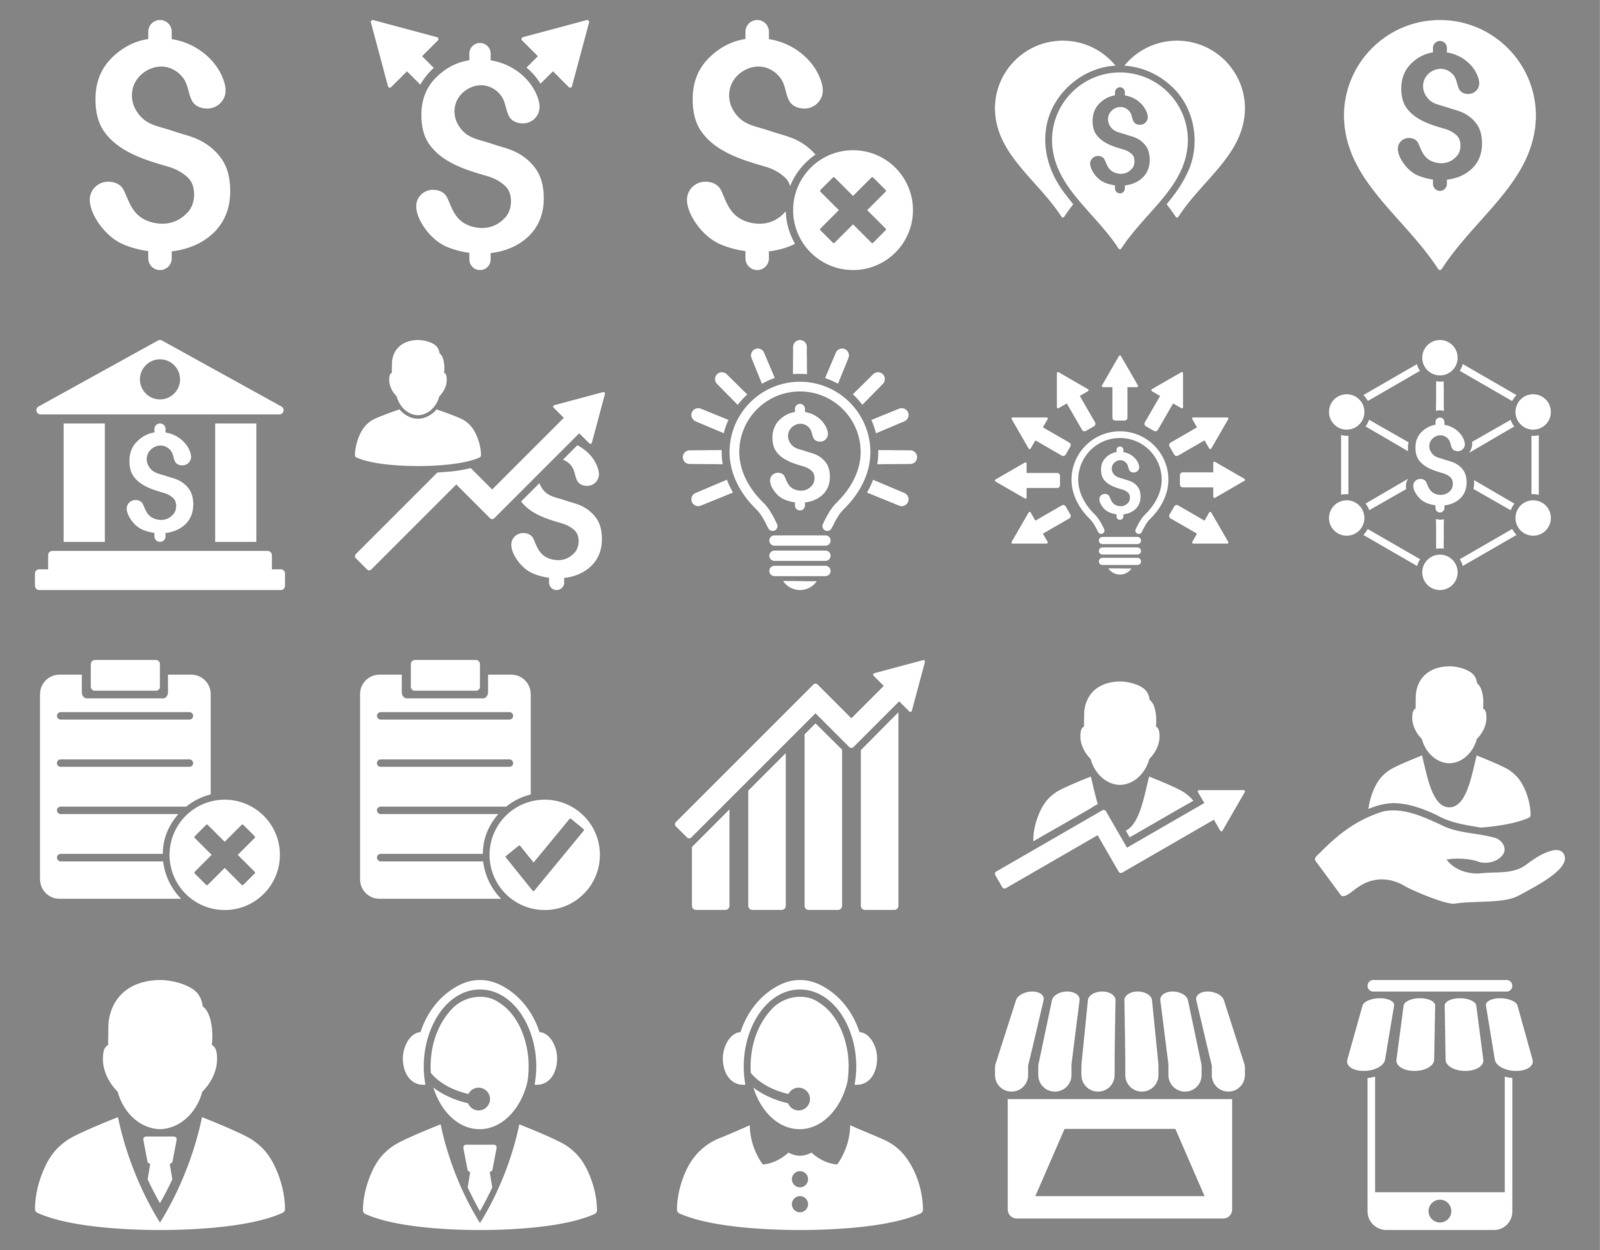 Trade business and bank service icon set. These flat icons use white color. Images are isolated on a gray background. Angles are rounded.